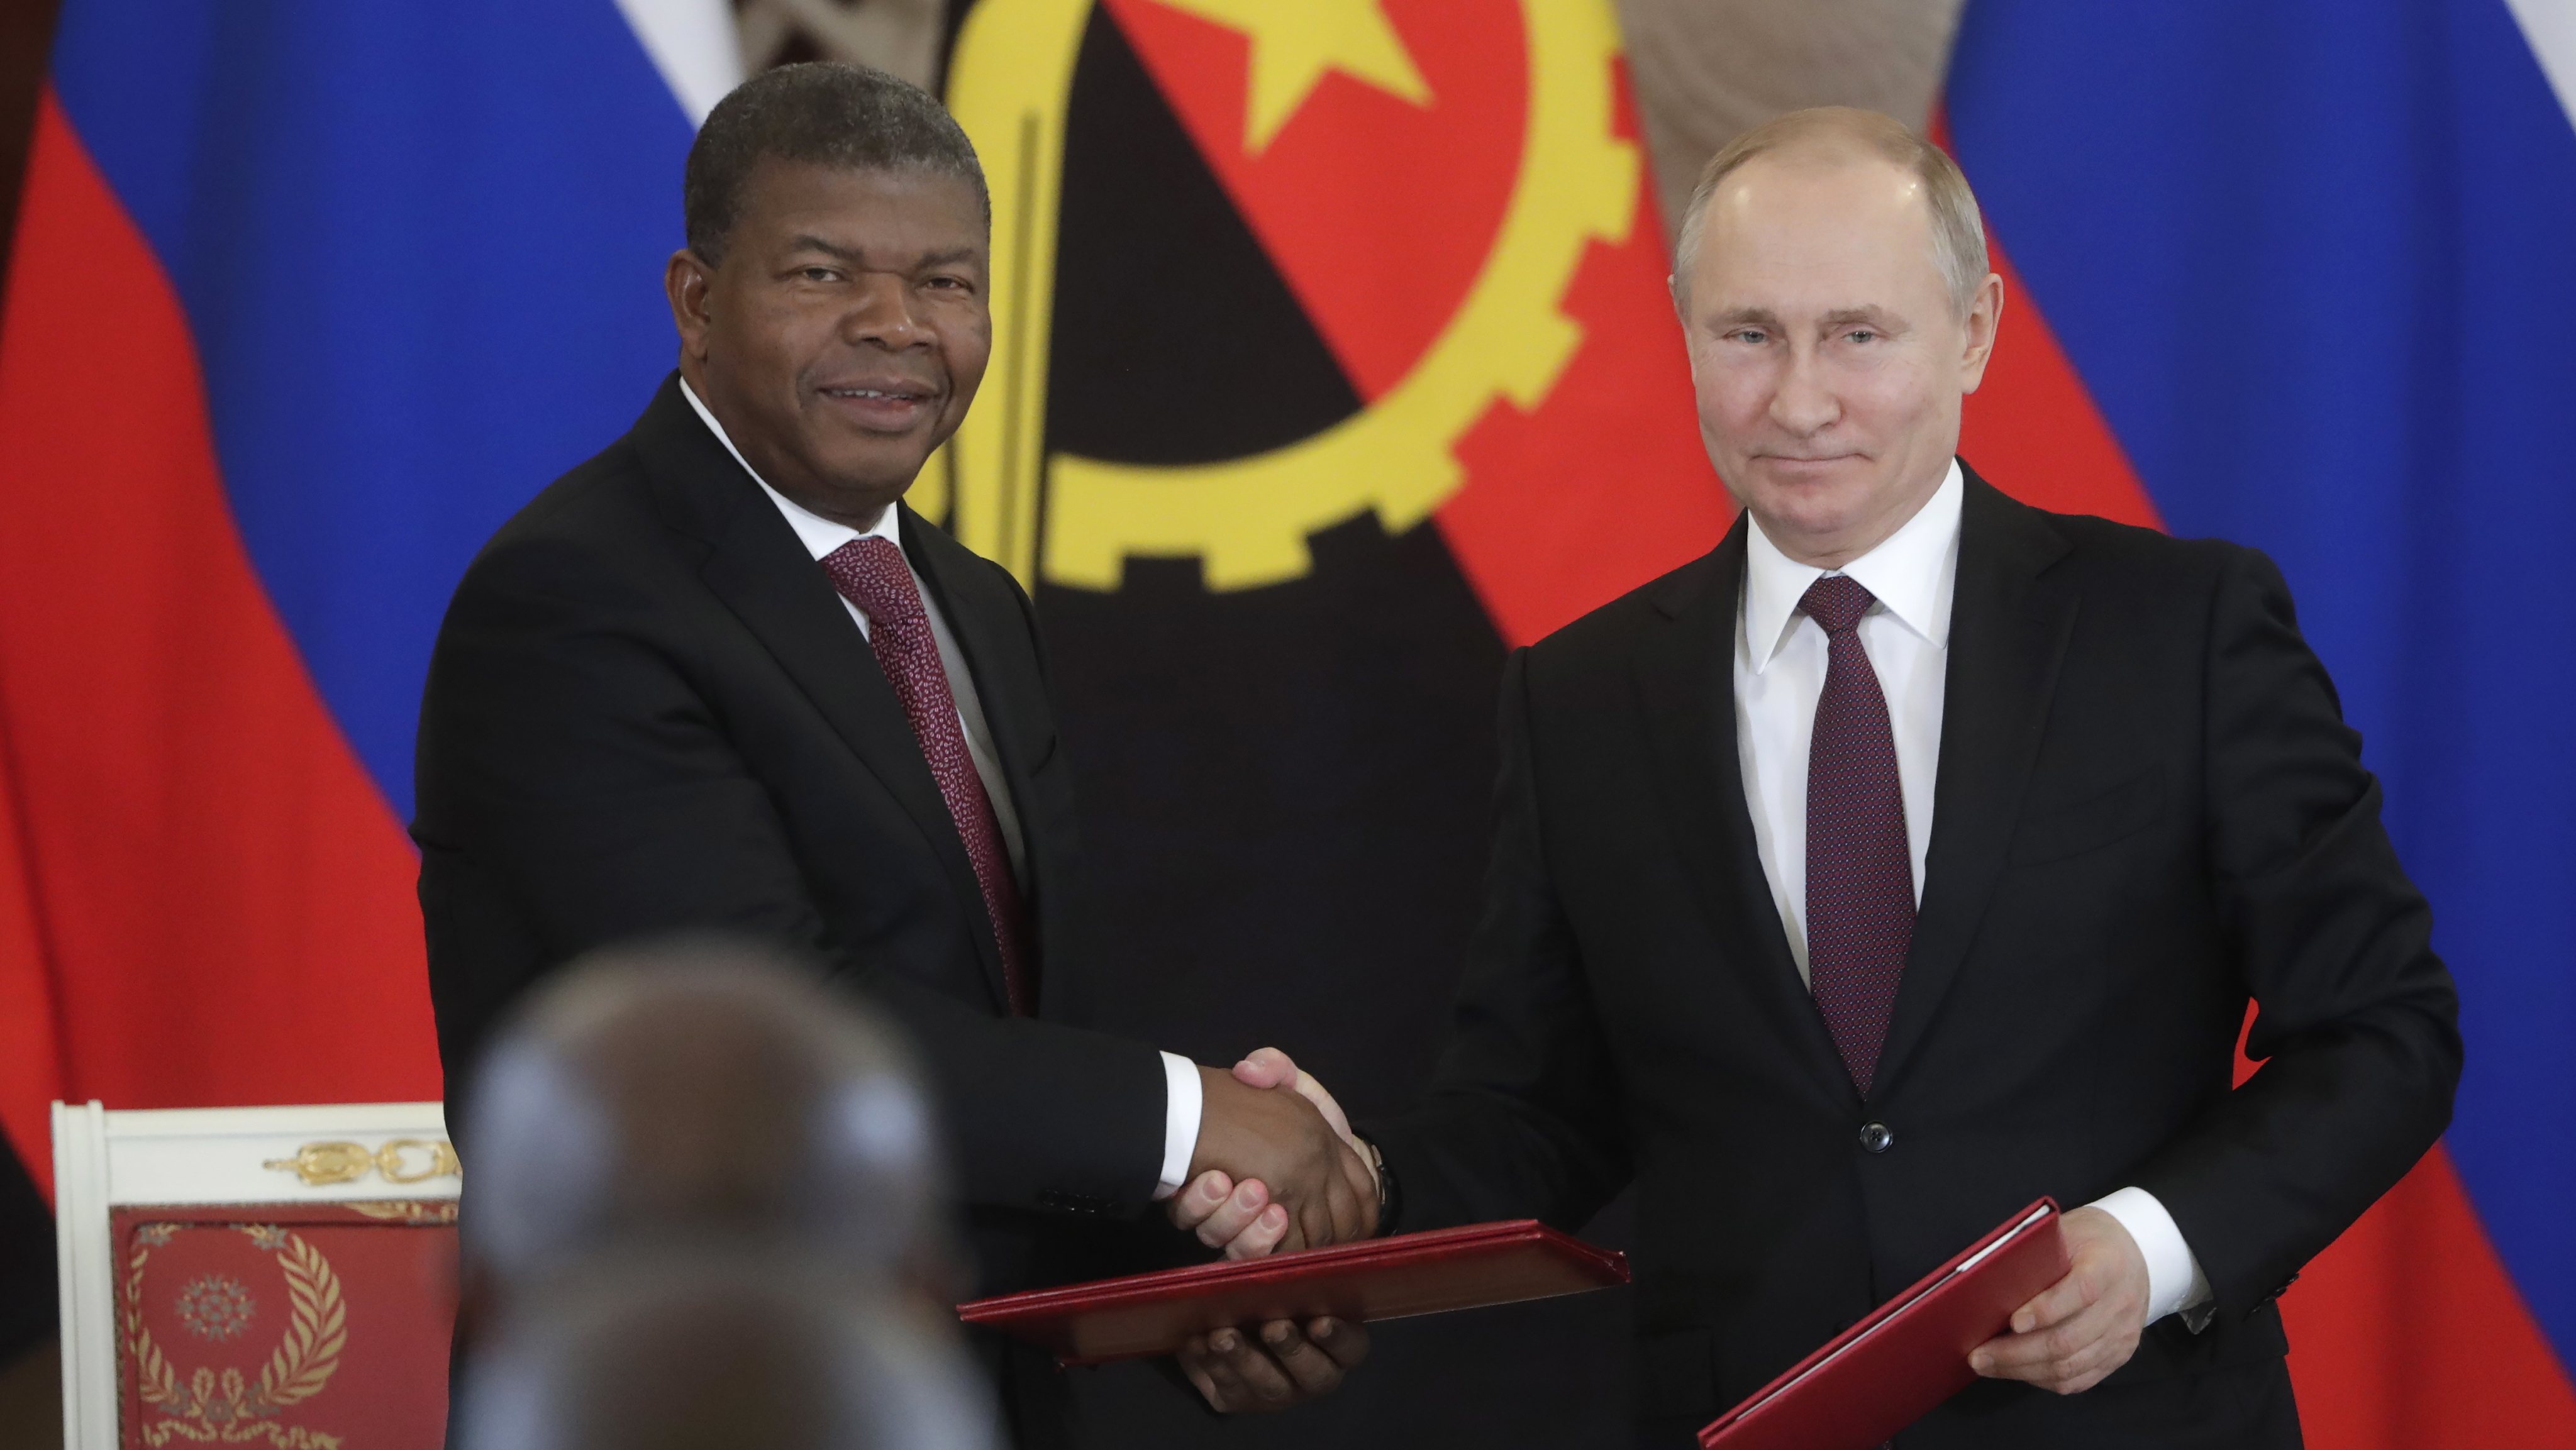 Presidents of Russia and Angola meet in Moscow